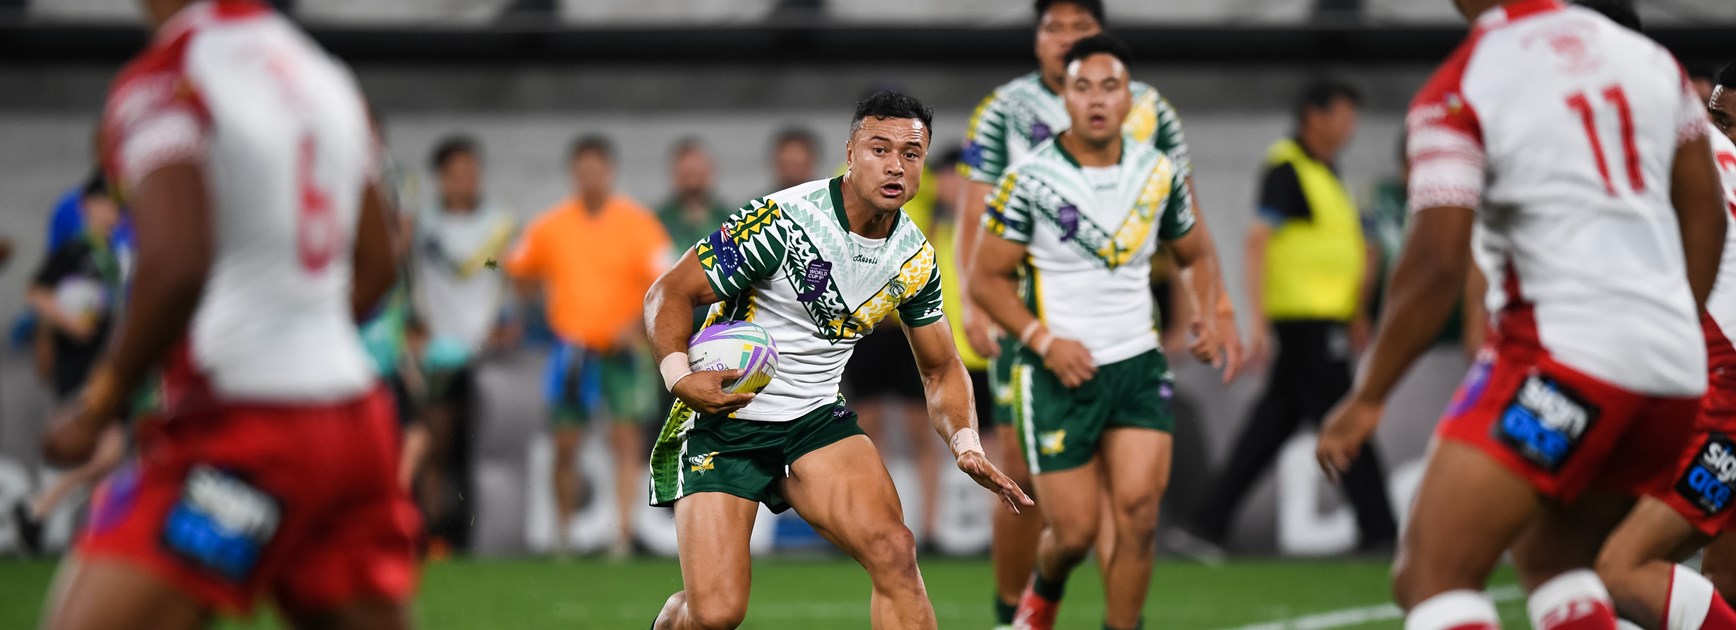 RLWC9s Teams of the Tournament named